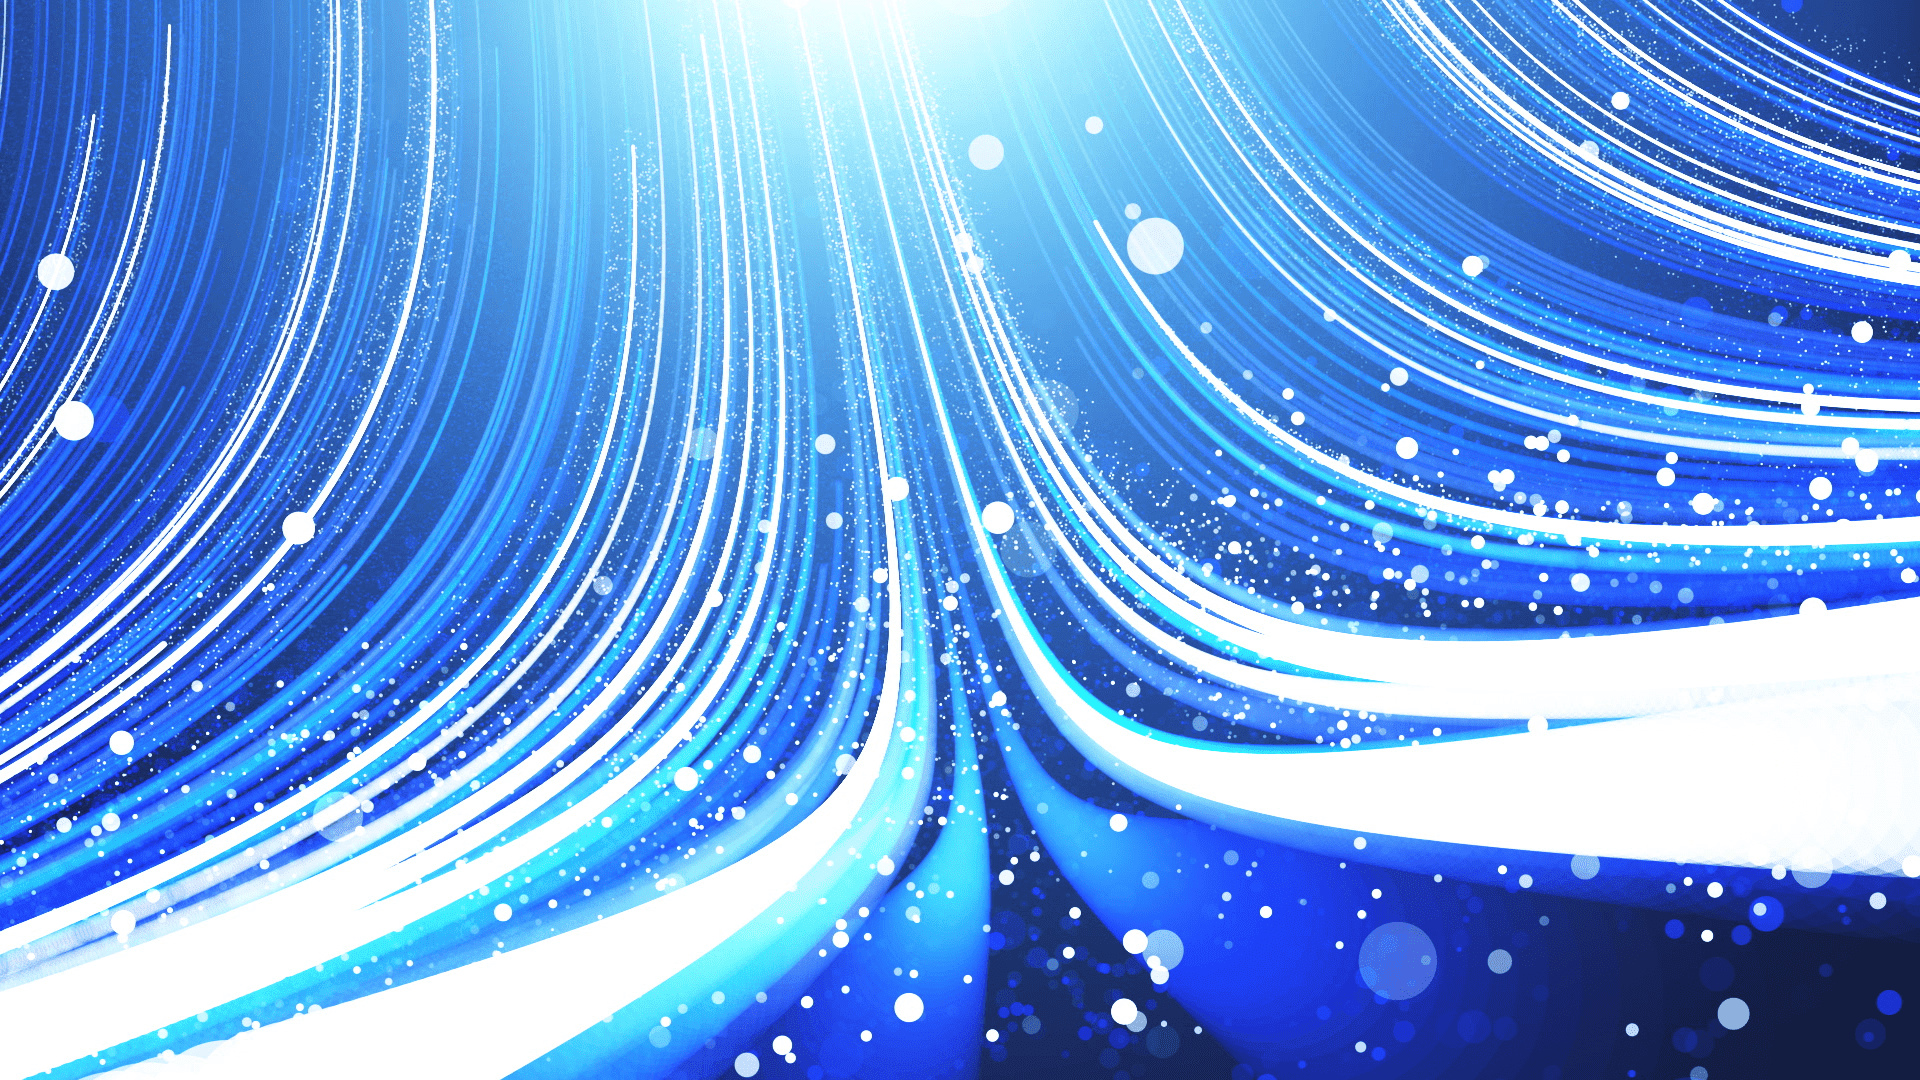 Abstract image of light waves on blue background